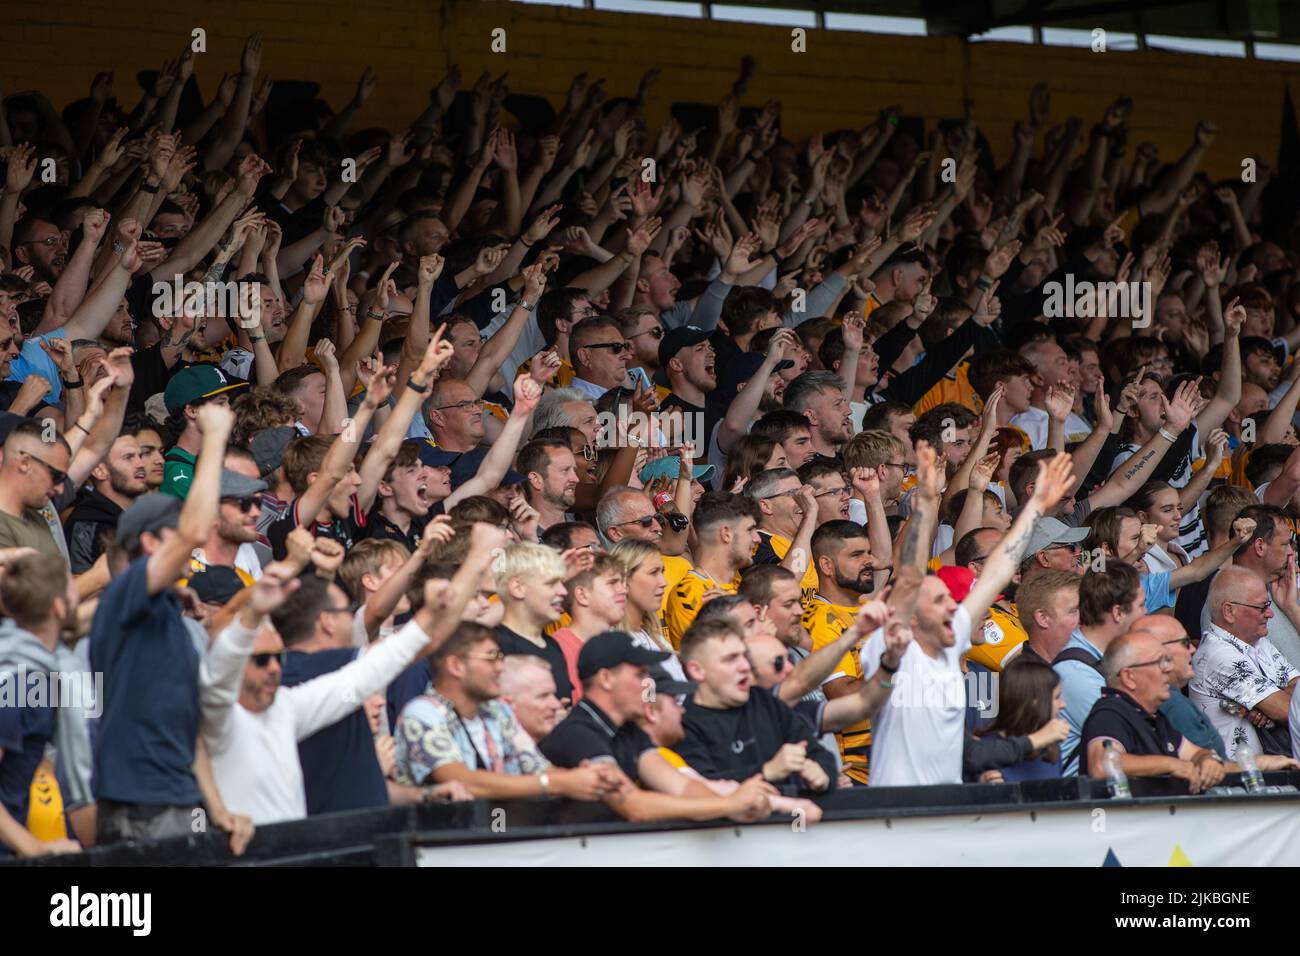 Football soccer fans cheering and chanting during match. Stock Photo